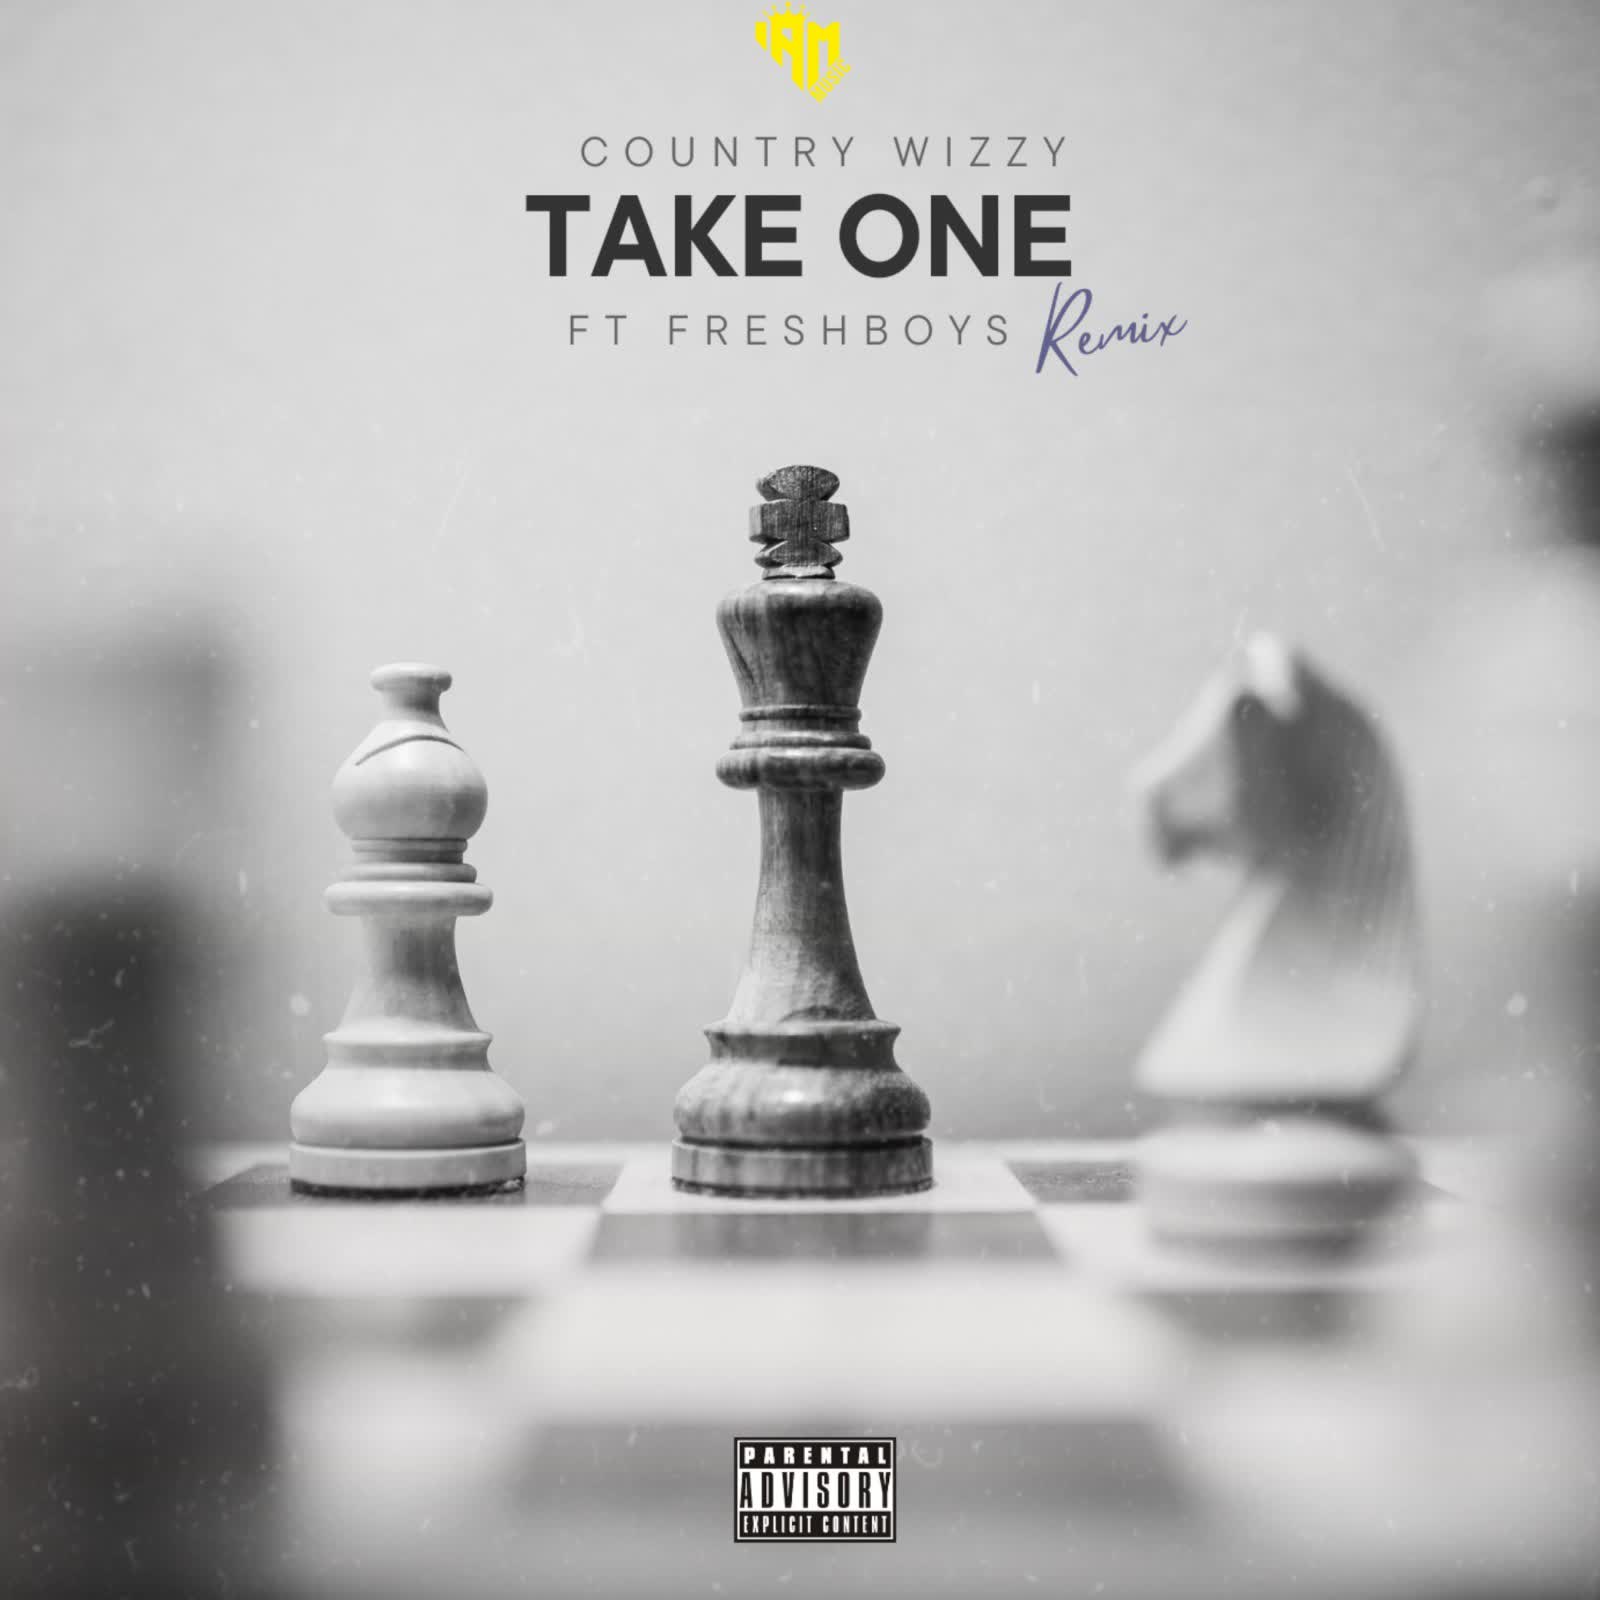 Country Wizzy Ft. FreshBoys - Take One (Remix)